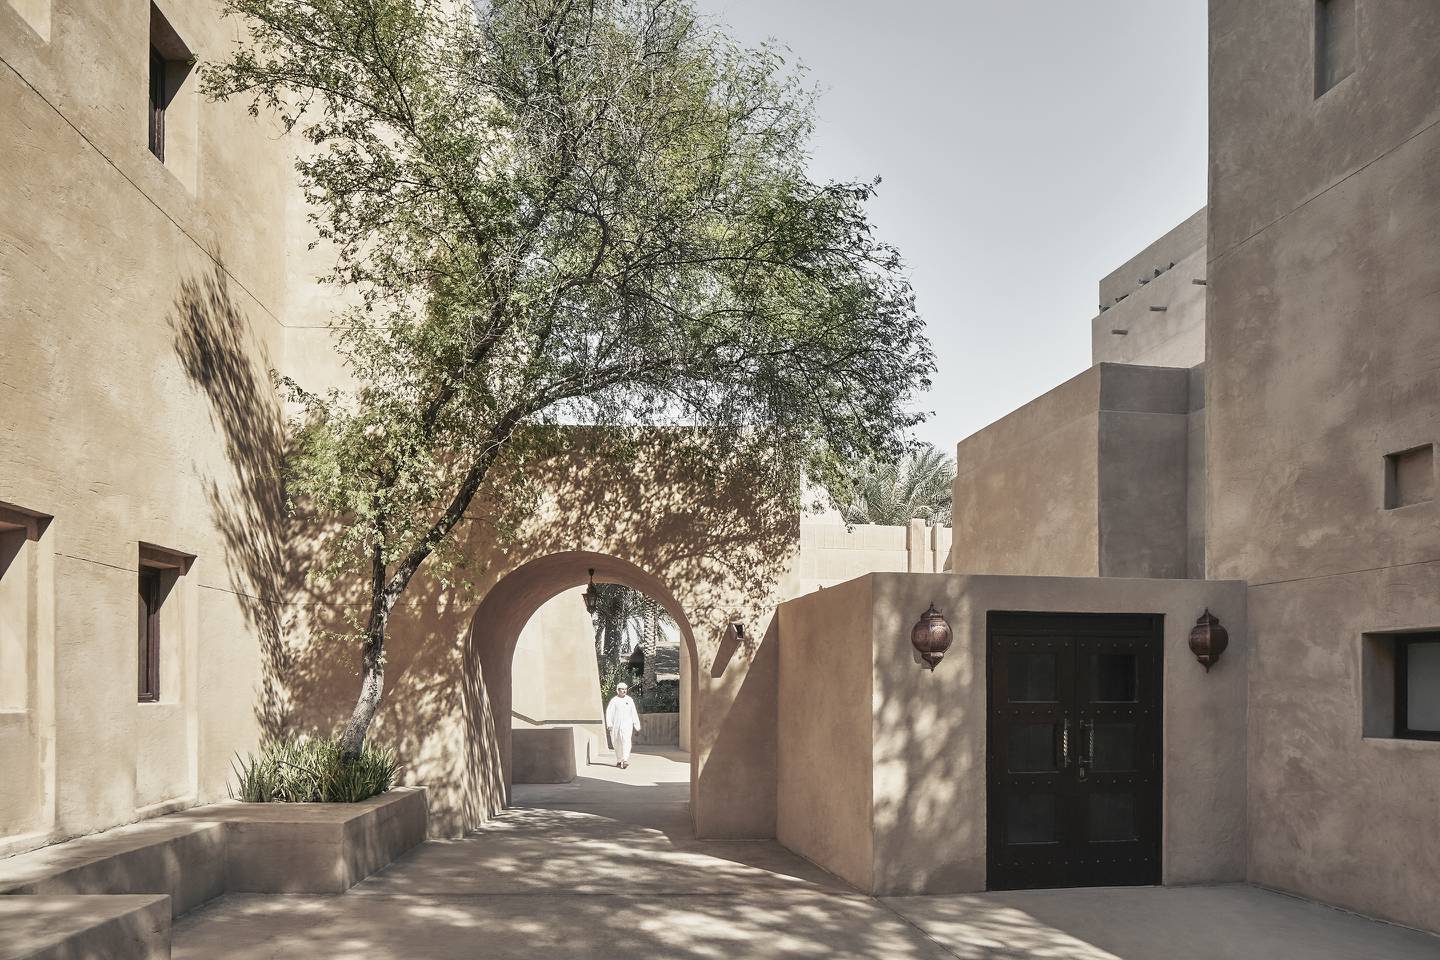 Dubai's Bab Al Shams will be the first of Kerzner's new Rare Finds collection, opening in early 2023. Photo: Kerzner